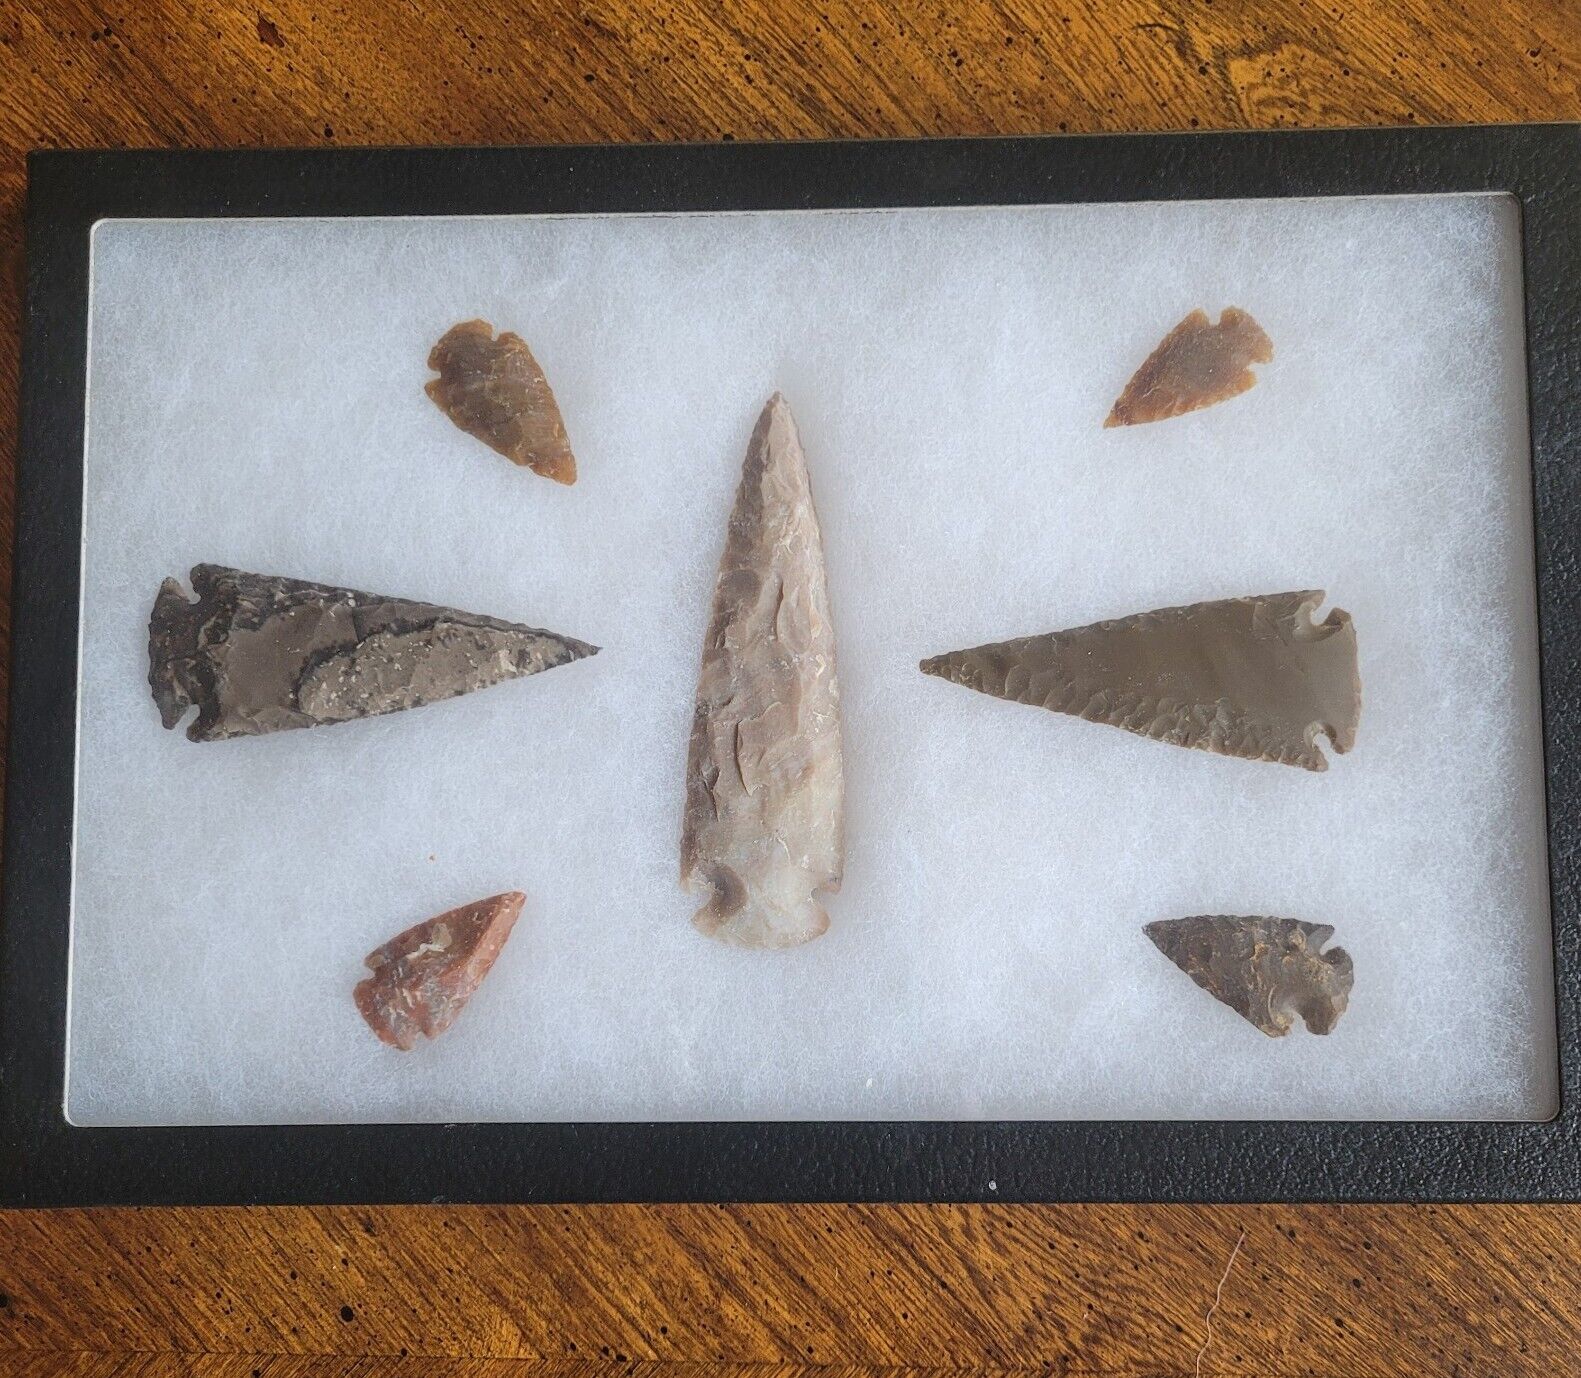 Group of 7 Reproduction Native American Arrowheads in Display Case